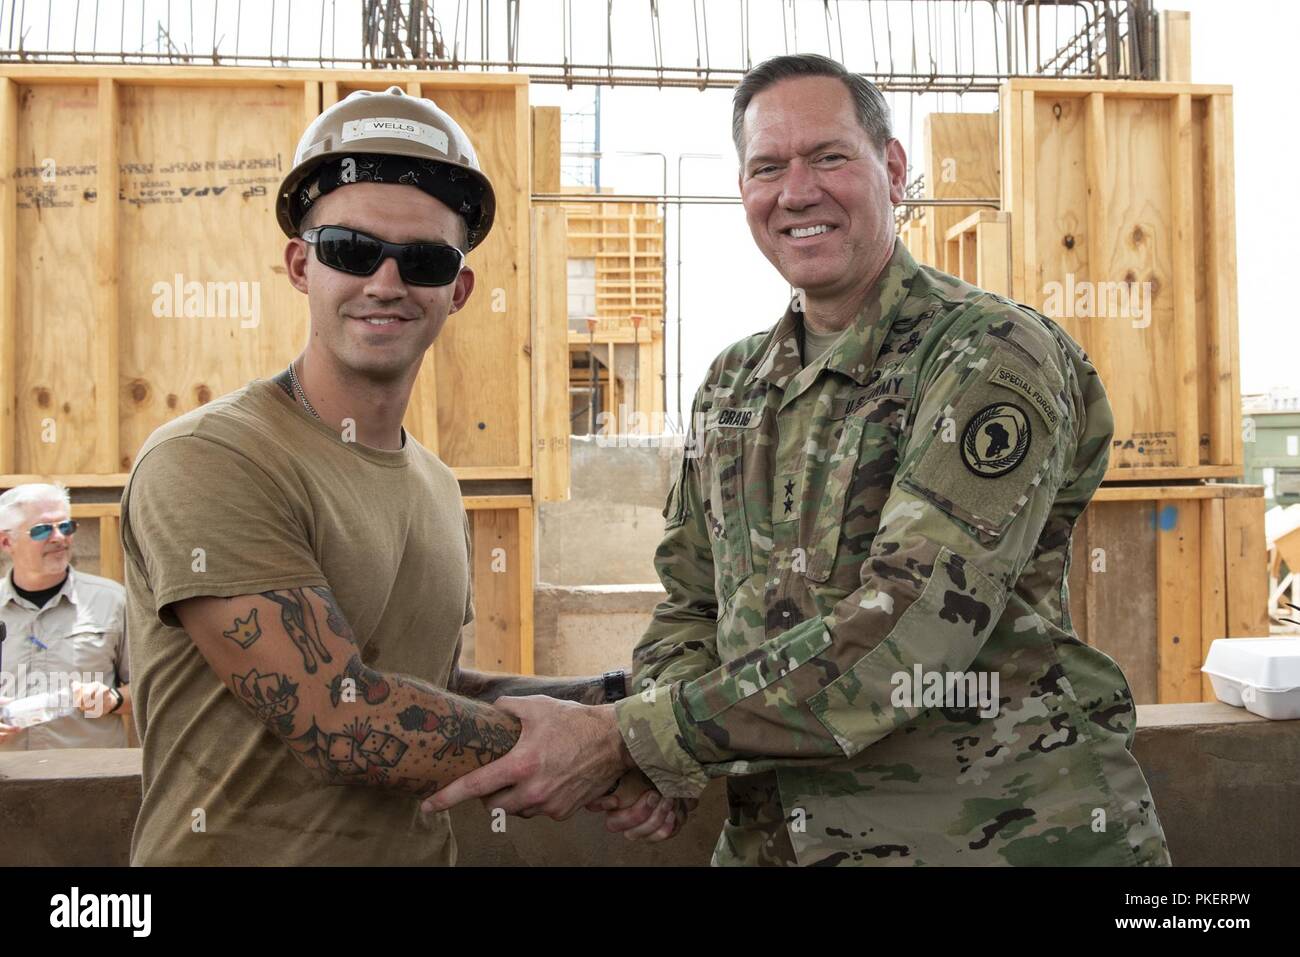 U.S. Navy Builder Constructionman Grant Wells, project crewmember, Naval Mobile Construction Battalion 11, Combined Joint Task Force - Horn of Africa, and U.S. Army Maj. Gen. James Craig, commanding general, CJTF-HOA, pose for a photo outside of Ali Oune, Djibouti, July 30, 2018. Wells was recognized for all of his hard work, positivity and work ethic put forth in his assignments toward the construction of the Ali Oune medical clinic. Stock Photo